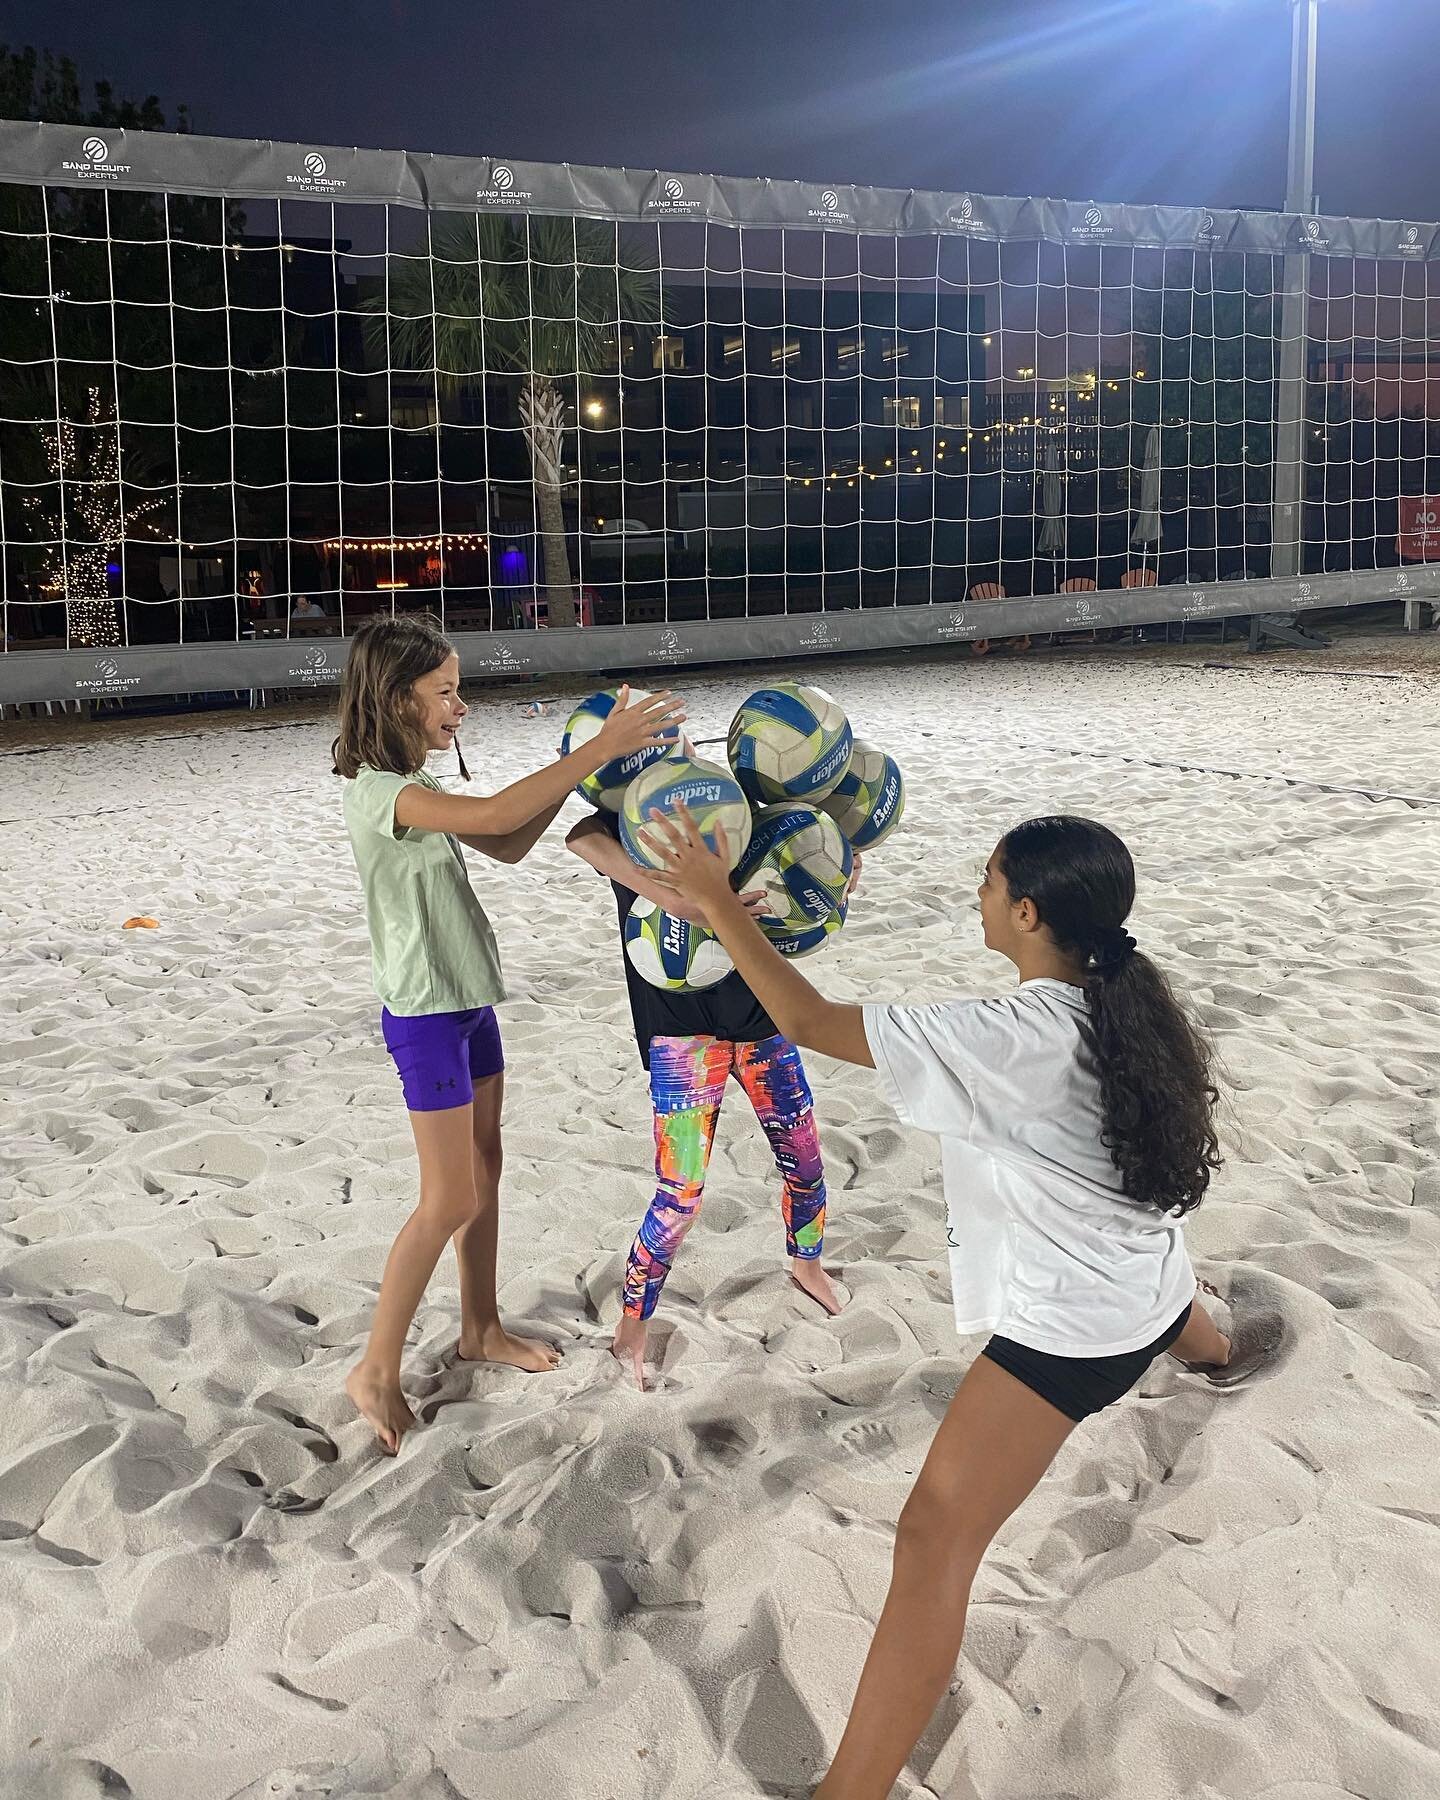 Breaking records on the court! Lyric holds the title for the most volleyballs held at once with a whopping 8 🏐🙌 Can any other beach volleyball club top that? 🤣
.
.
.
.
.
.
.

#PhilDalhausserBVA #PDBVA #PhilDalhausser #SandVolleyball #Volleyball #B